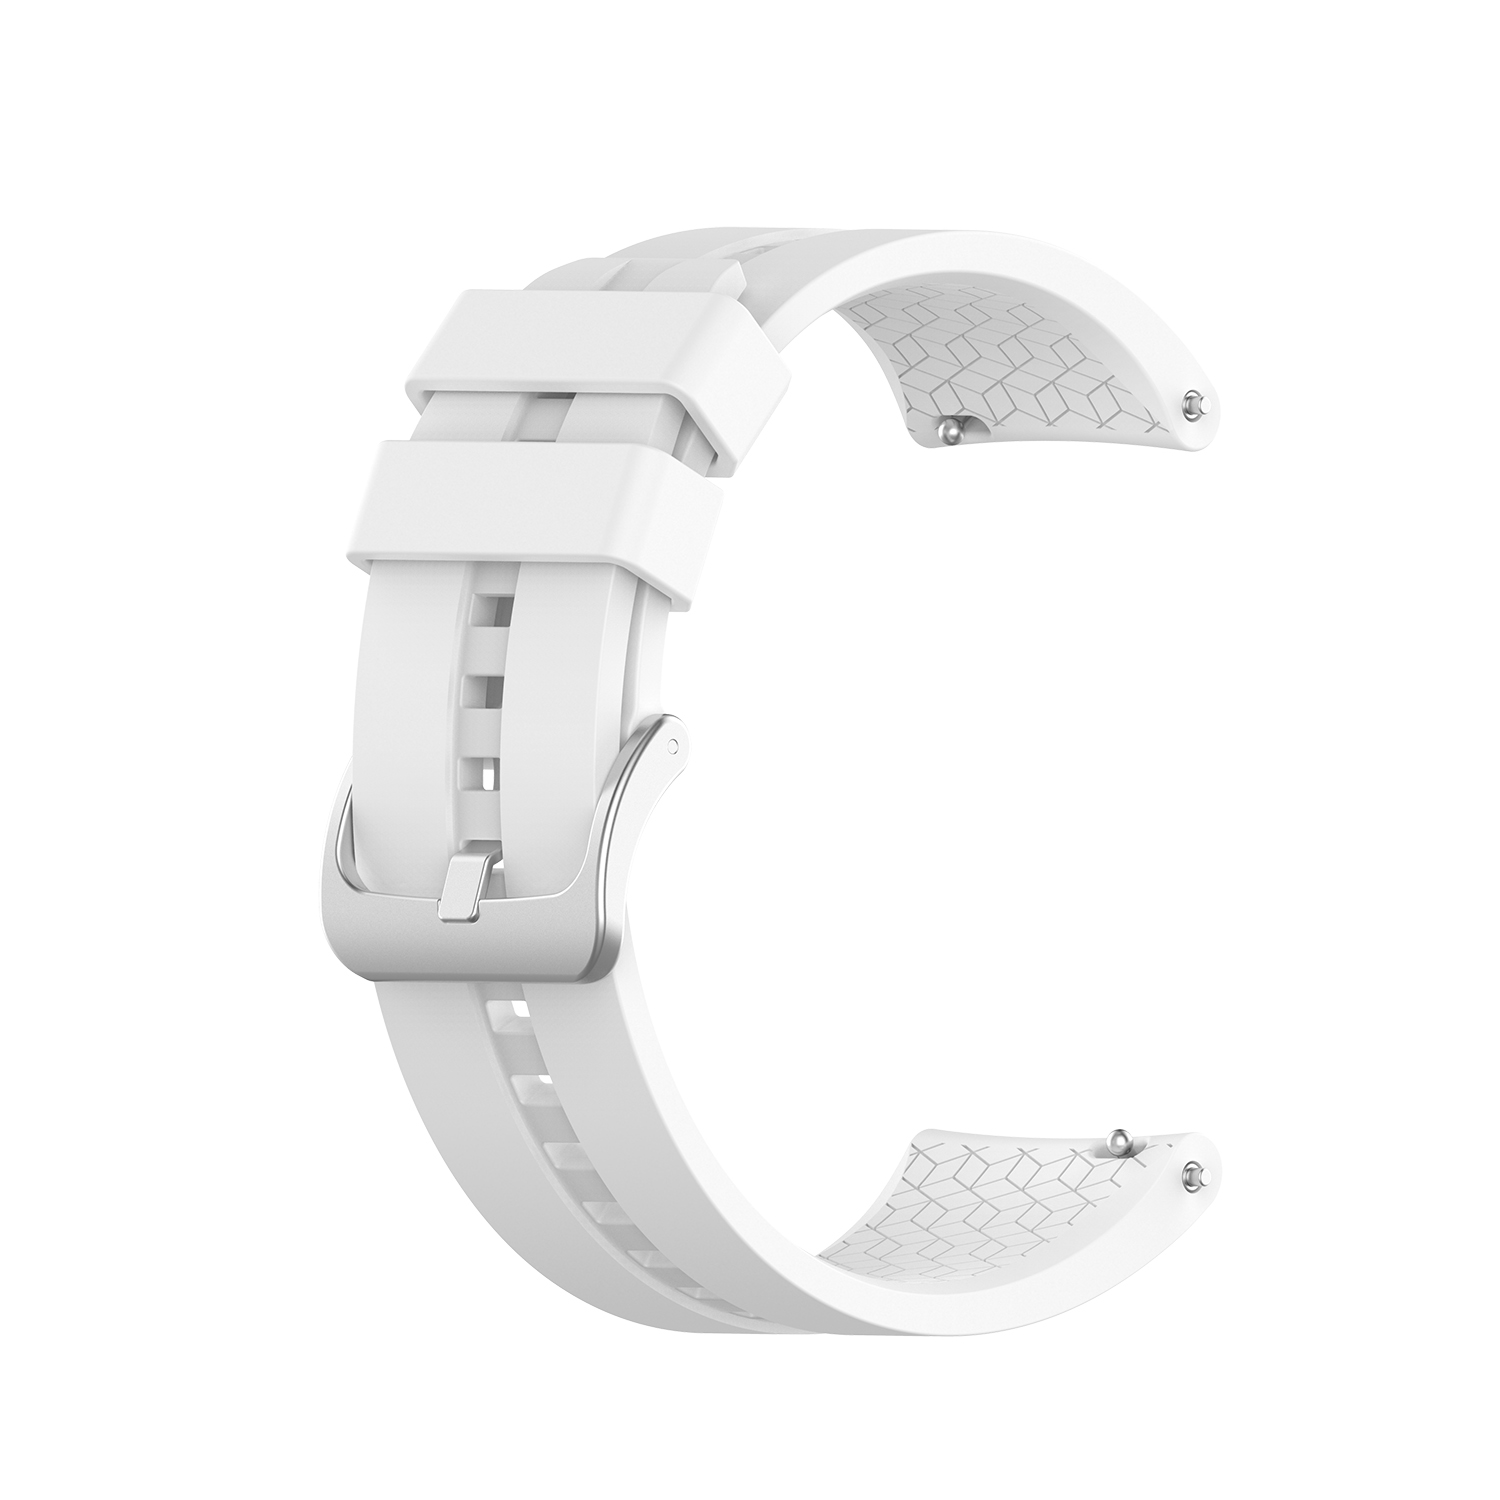 Bakeey-20mm-Watch-Band-Silicone-Watch-Strap-Replacement-for-BW-HL2-Smart-Watch-1621780-1